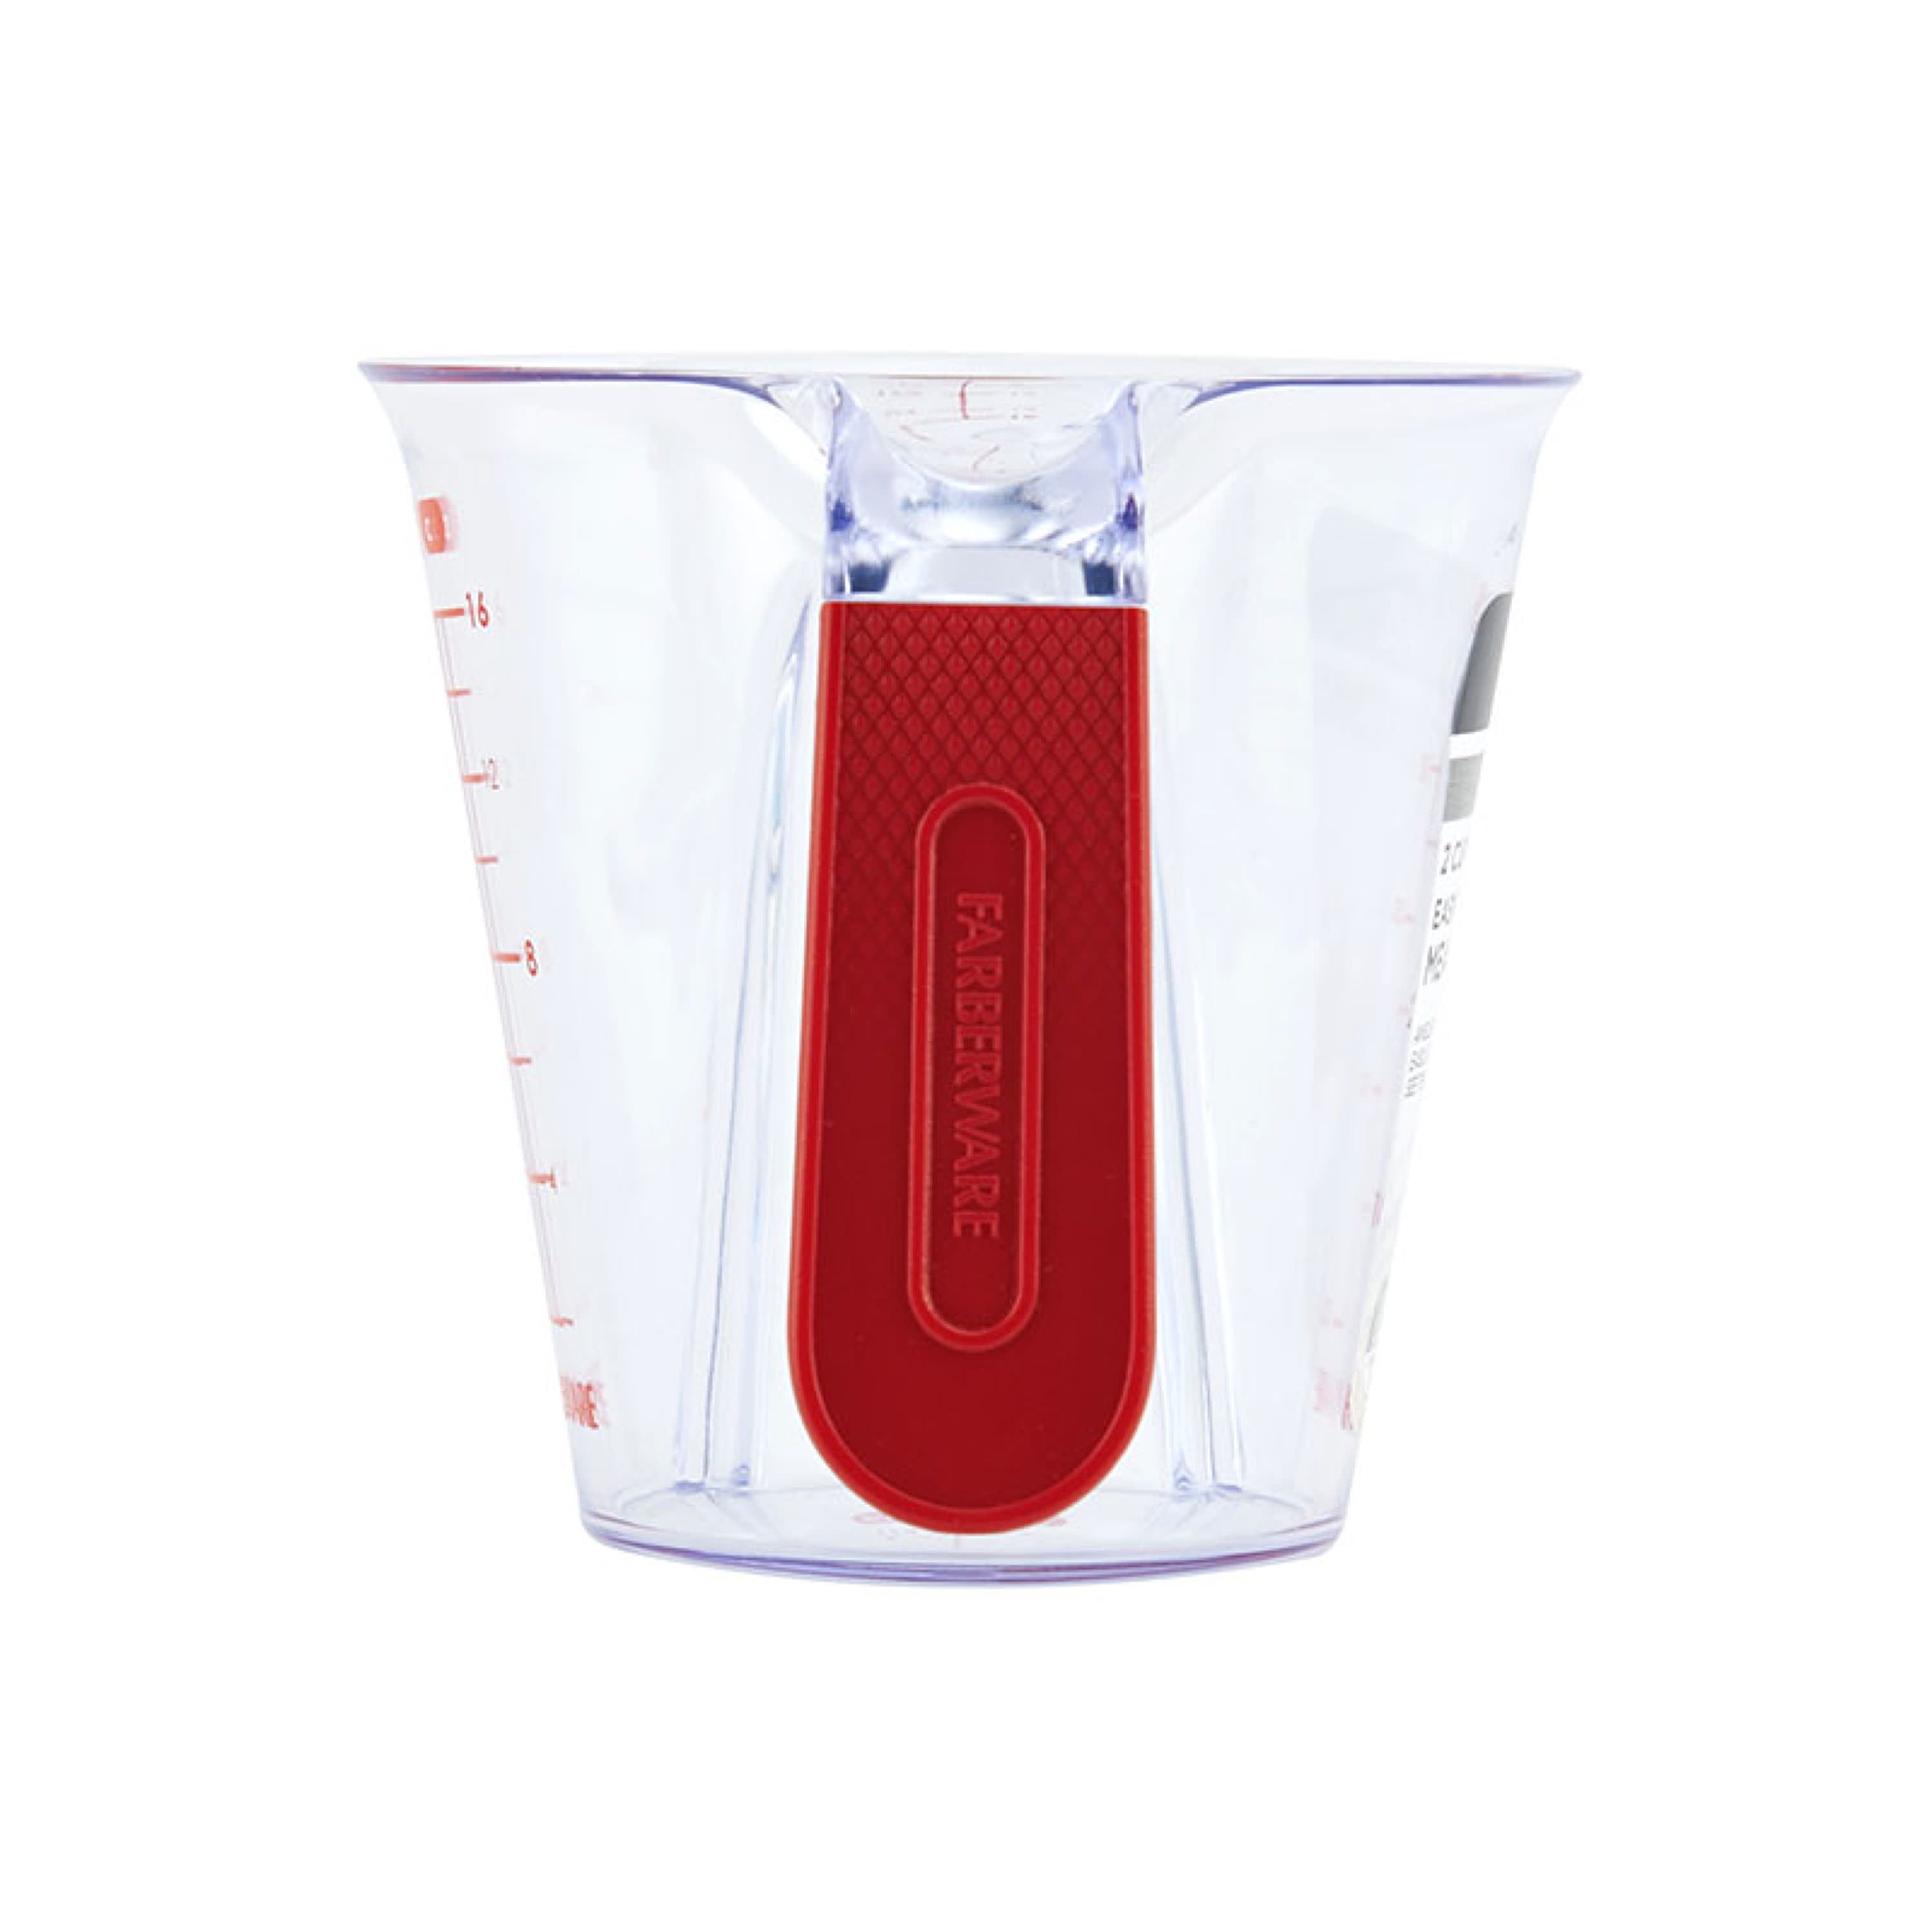 REVIEW Farberware Pro Angled Measuring Cup 